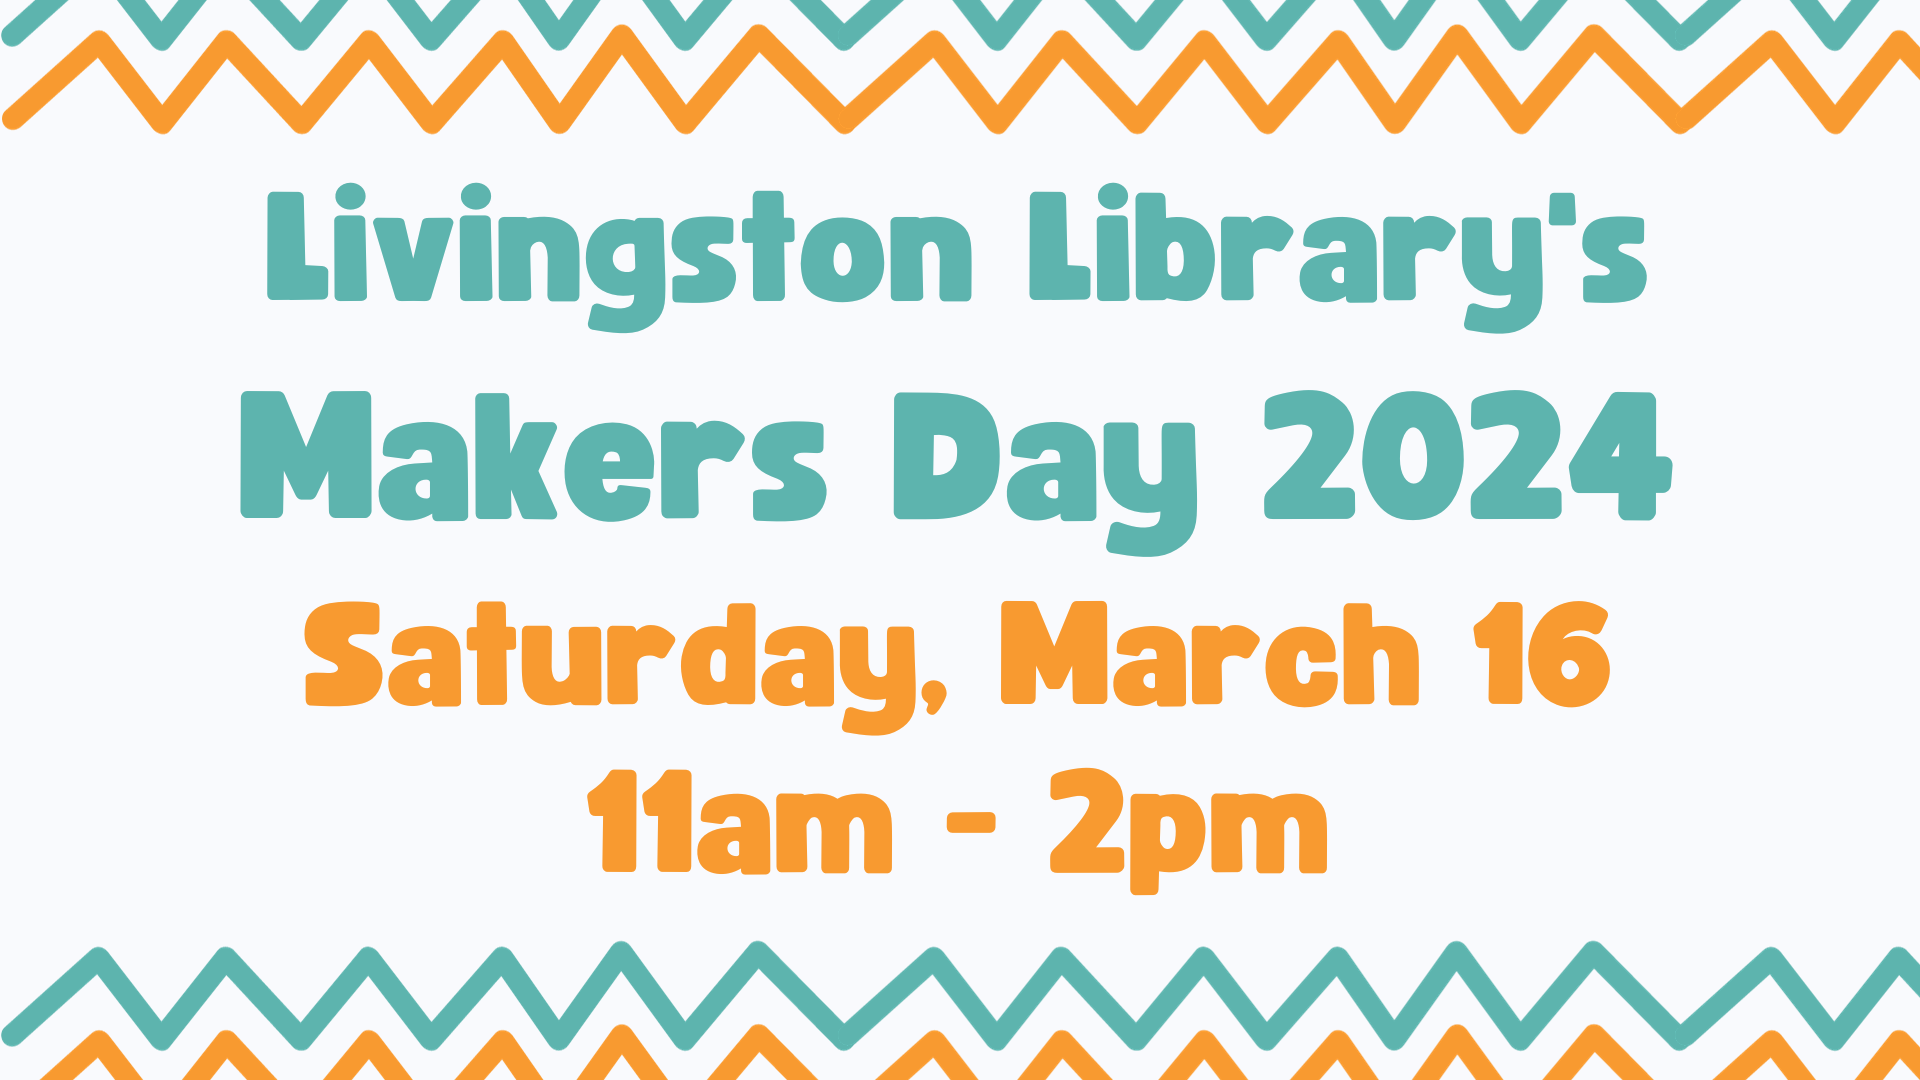 Livingston Library's Makers Day 2024: Saturday, March 16 11am - 2pm. Blue and orange zigzag stripes on light gray background.